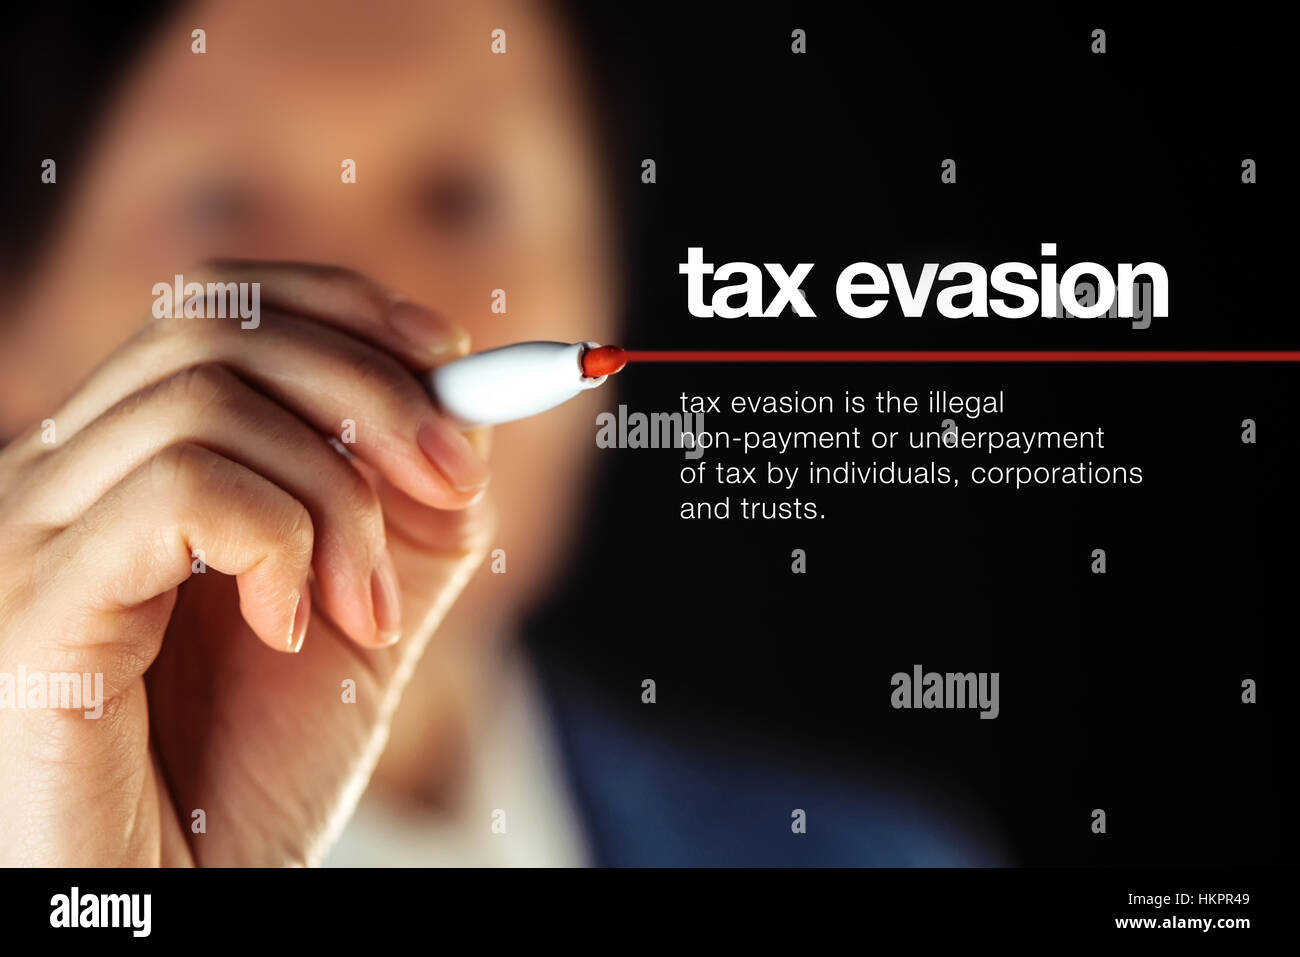 Tax evasion definition, illegal non-payment or underpayment of tax by individuals, corporations and trusts Stock Photo